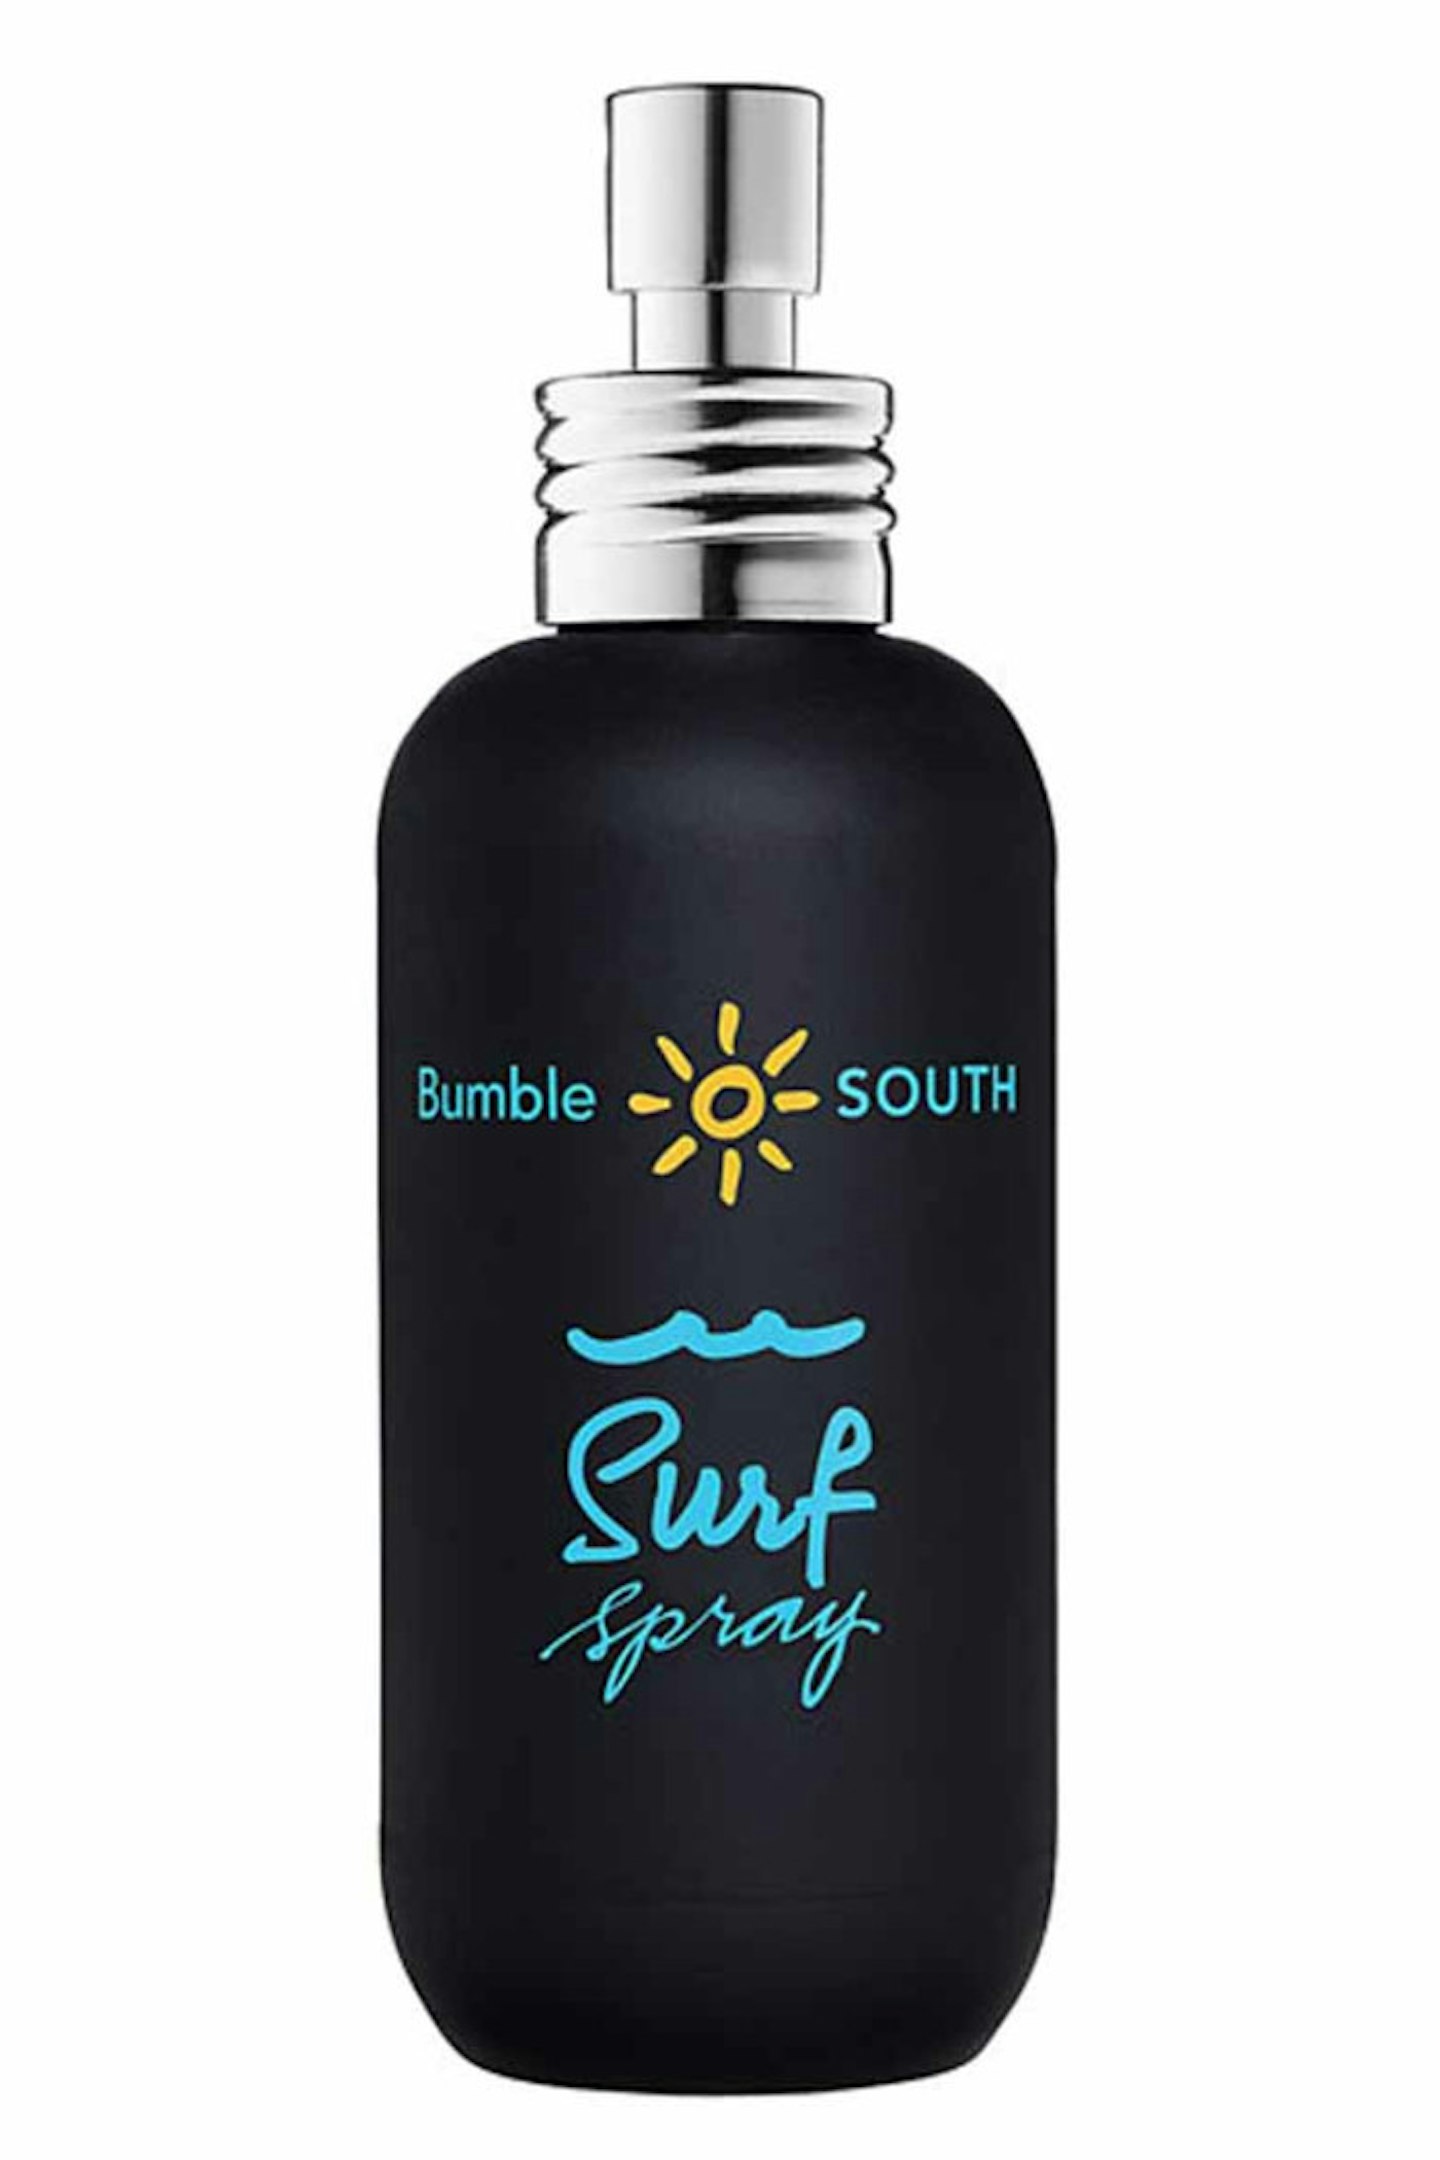 5. Bumble and Bumble Surf Spray, £21.50